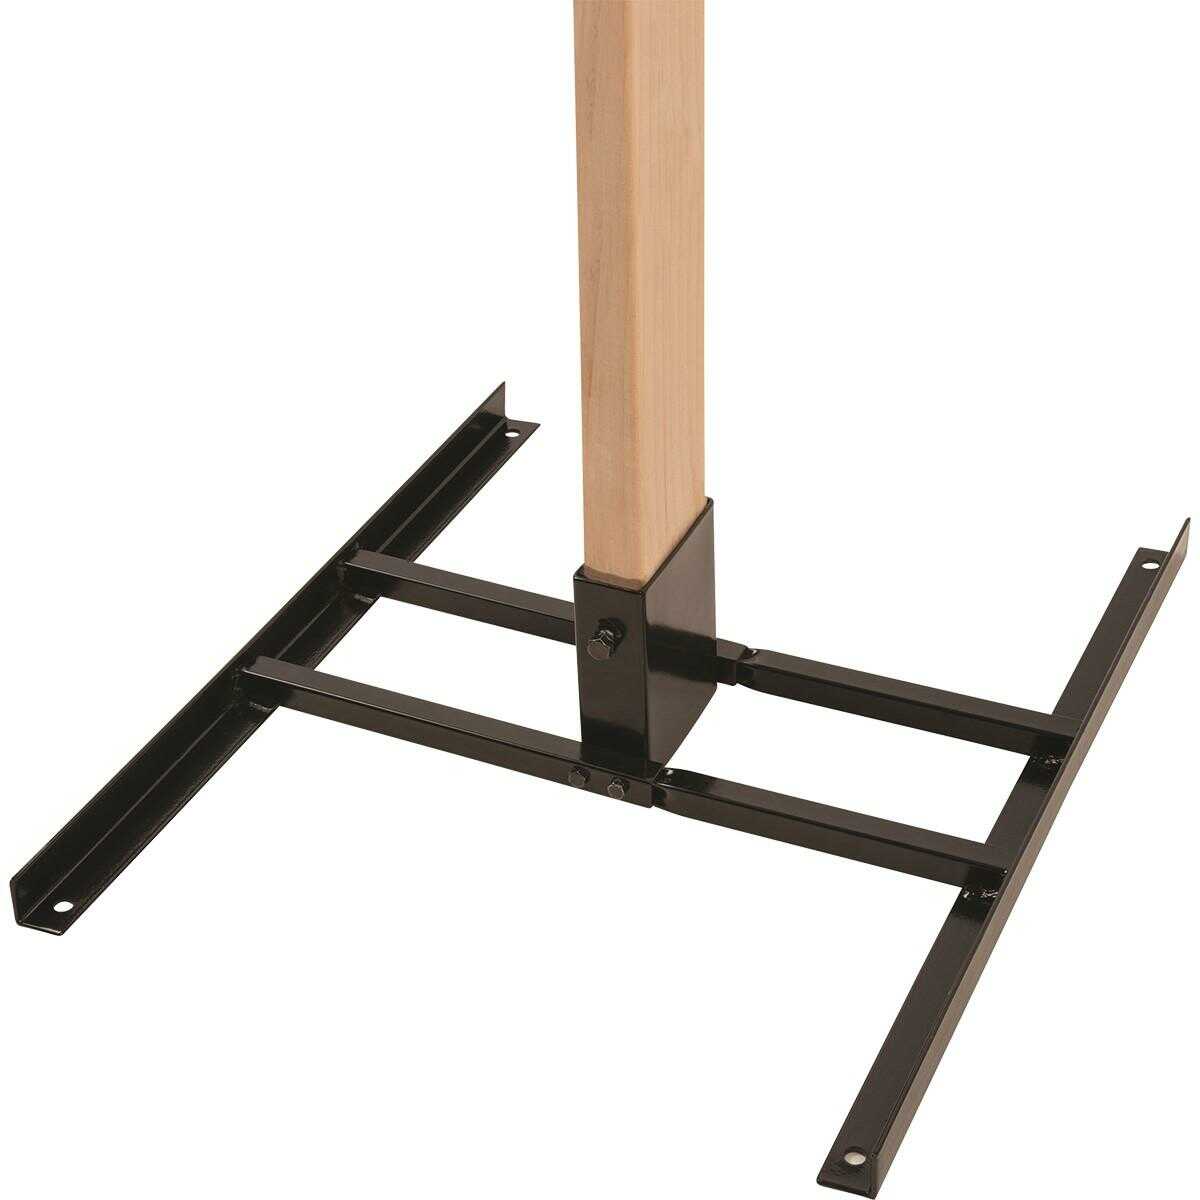 Allen EZ Aim Target Stand Base For 2x4 Upright